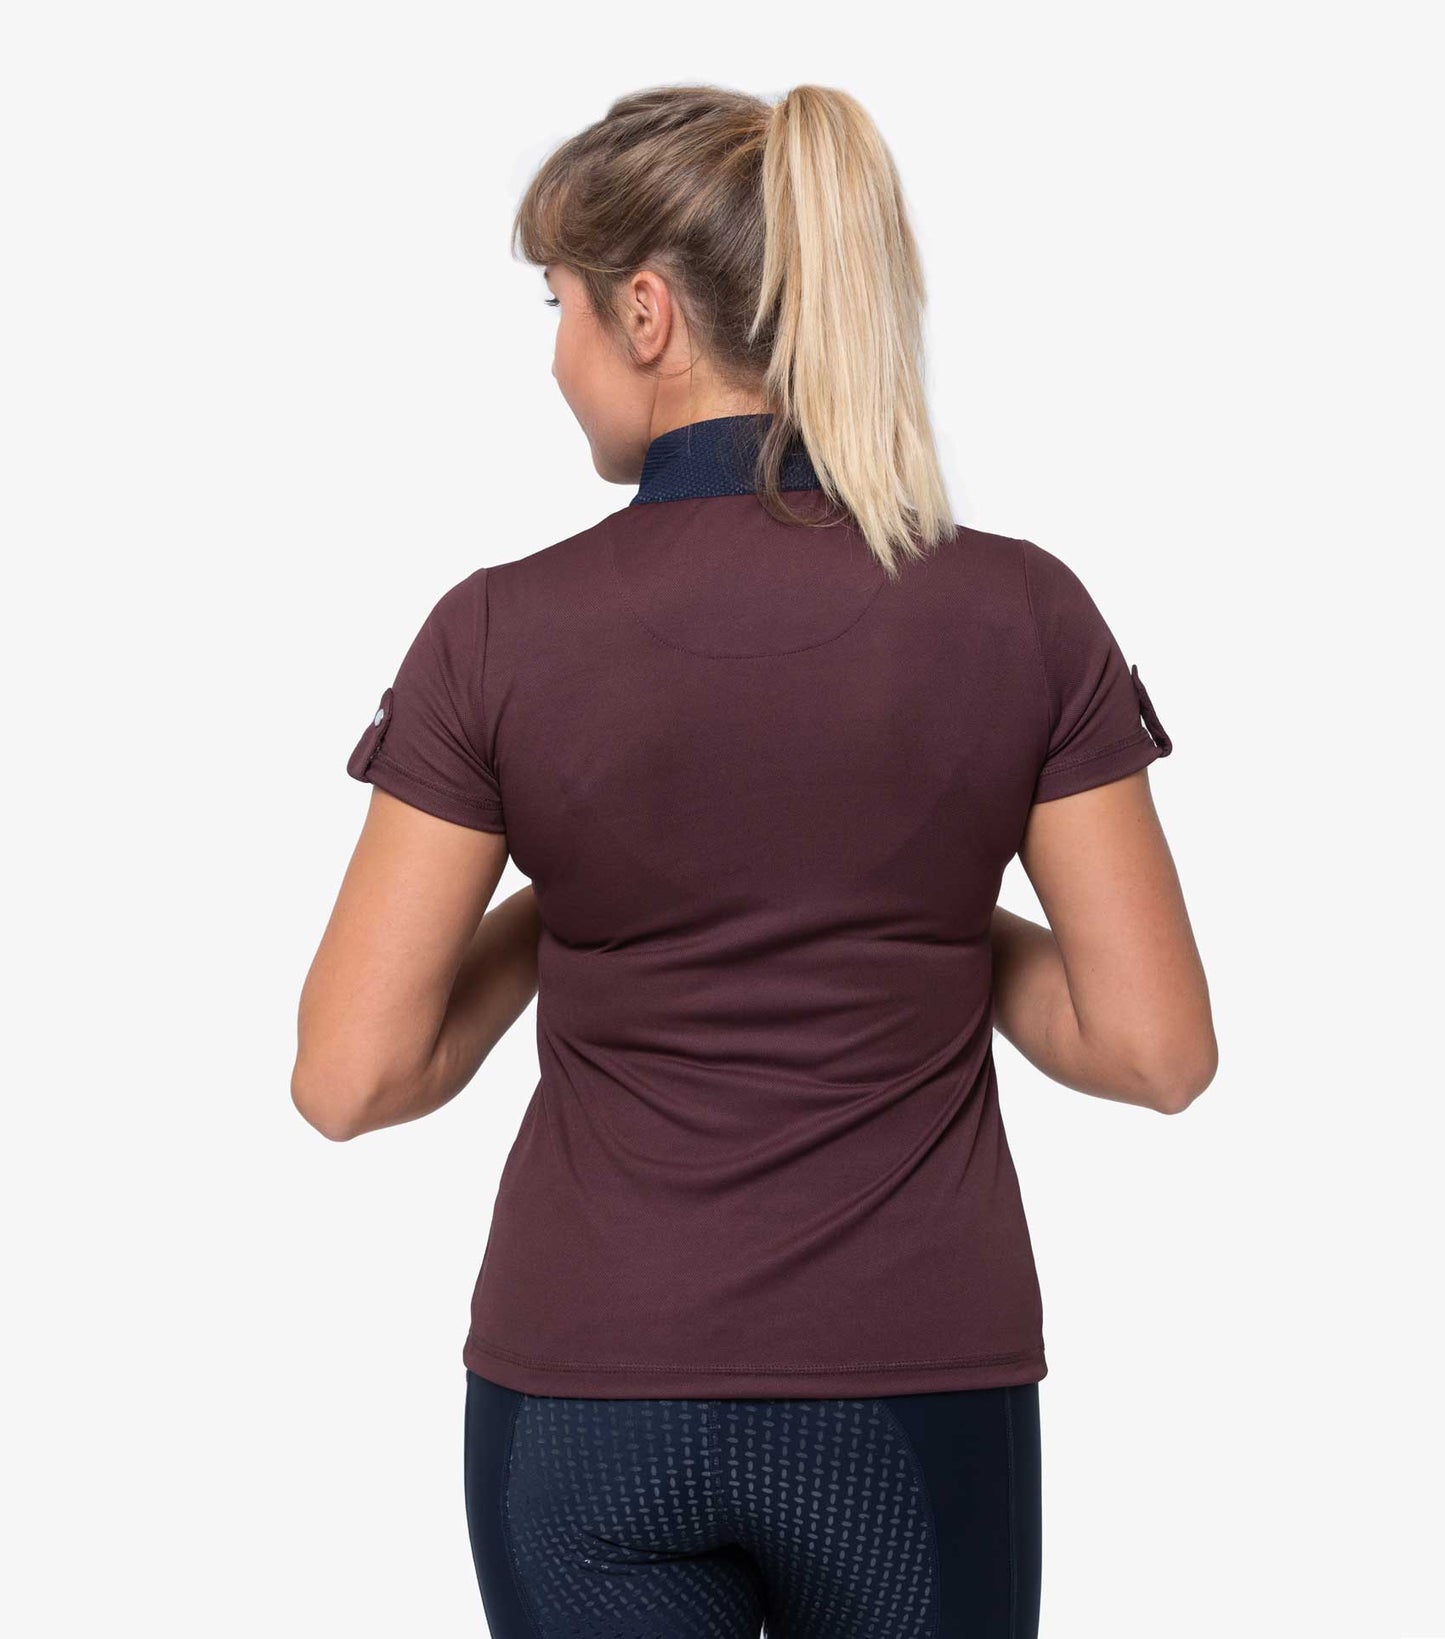 Premier Equine Amia Ladies Technical Short Sleeved Riding Top